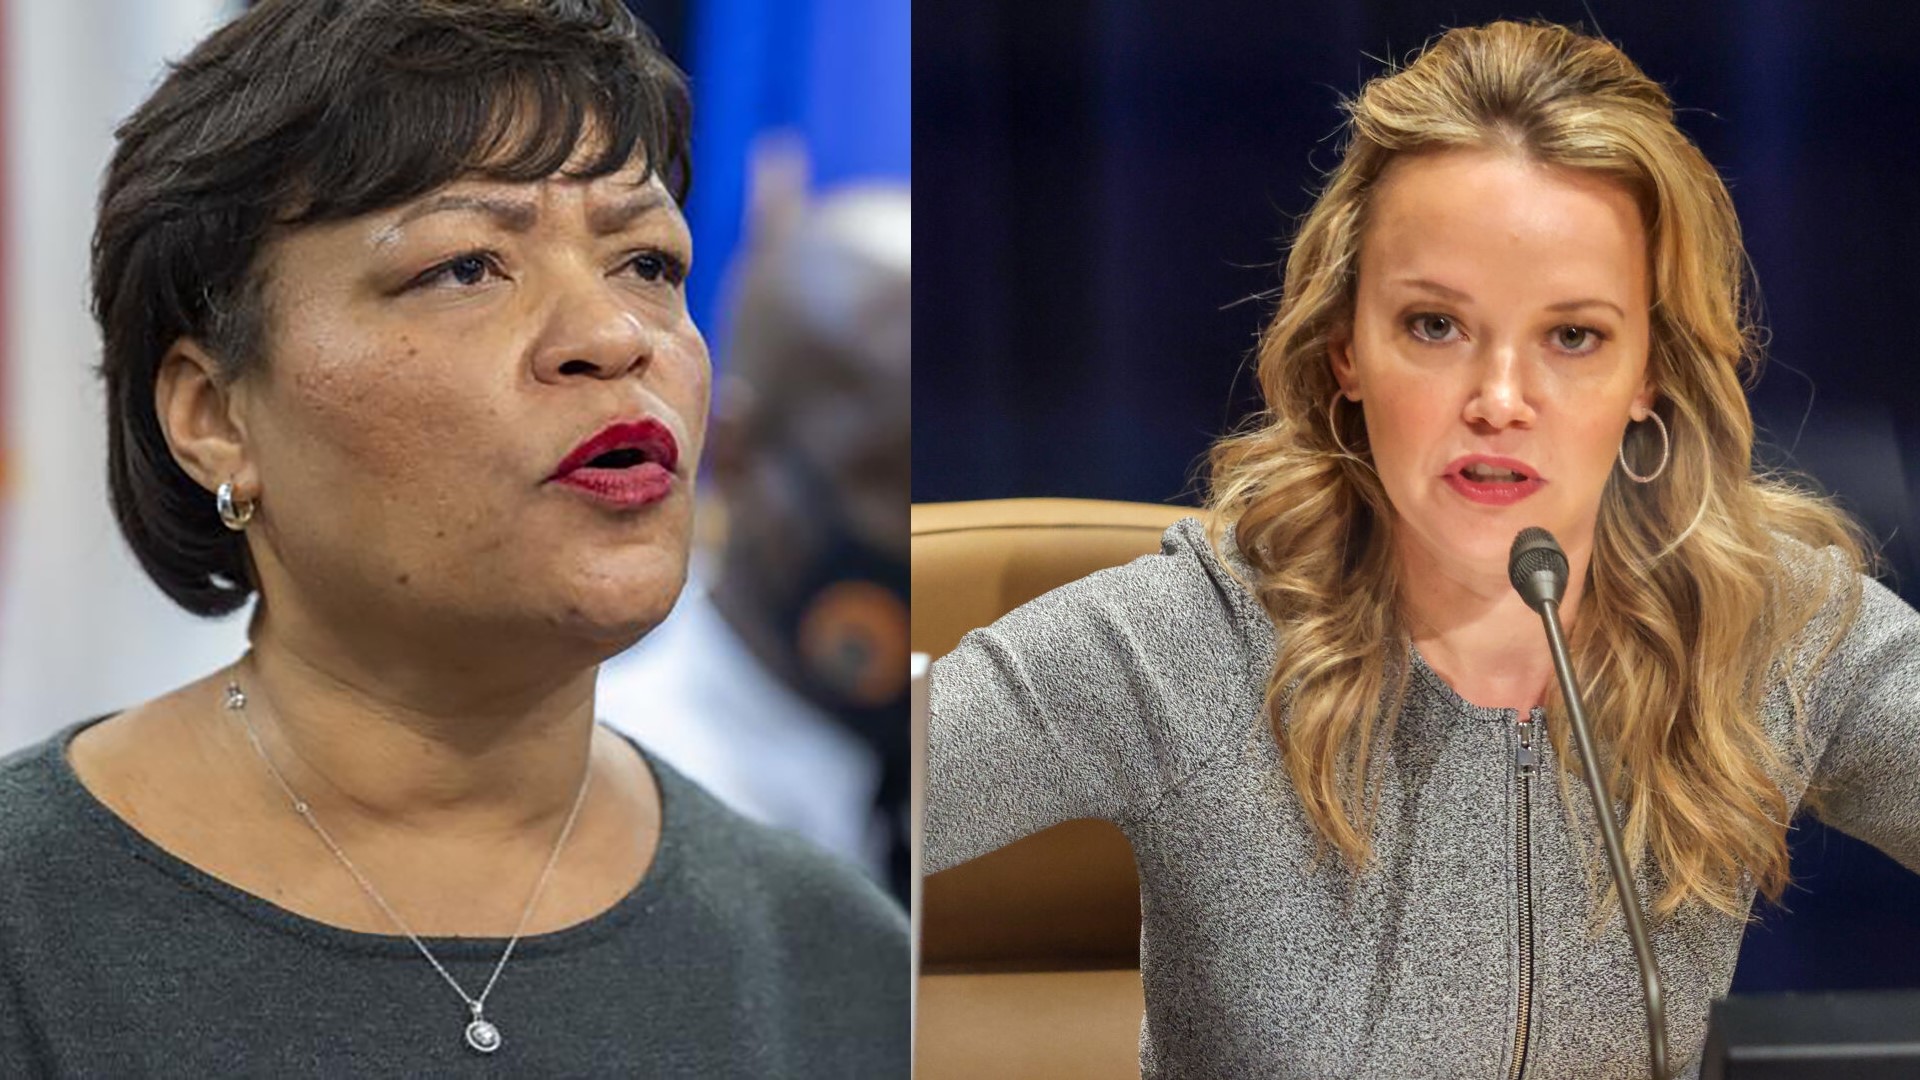 Mayor Cantrell and some council members can’t seem to agree on anything, and Cantrell seems intent on flipping off the council’s attempts to rein in her excesses.